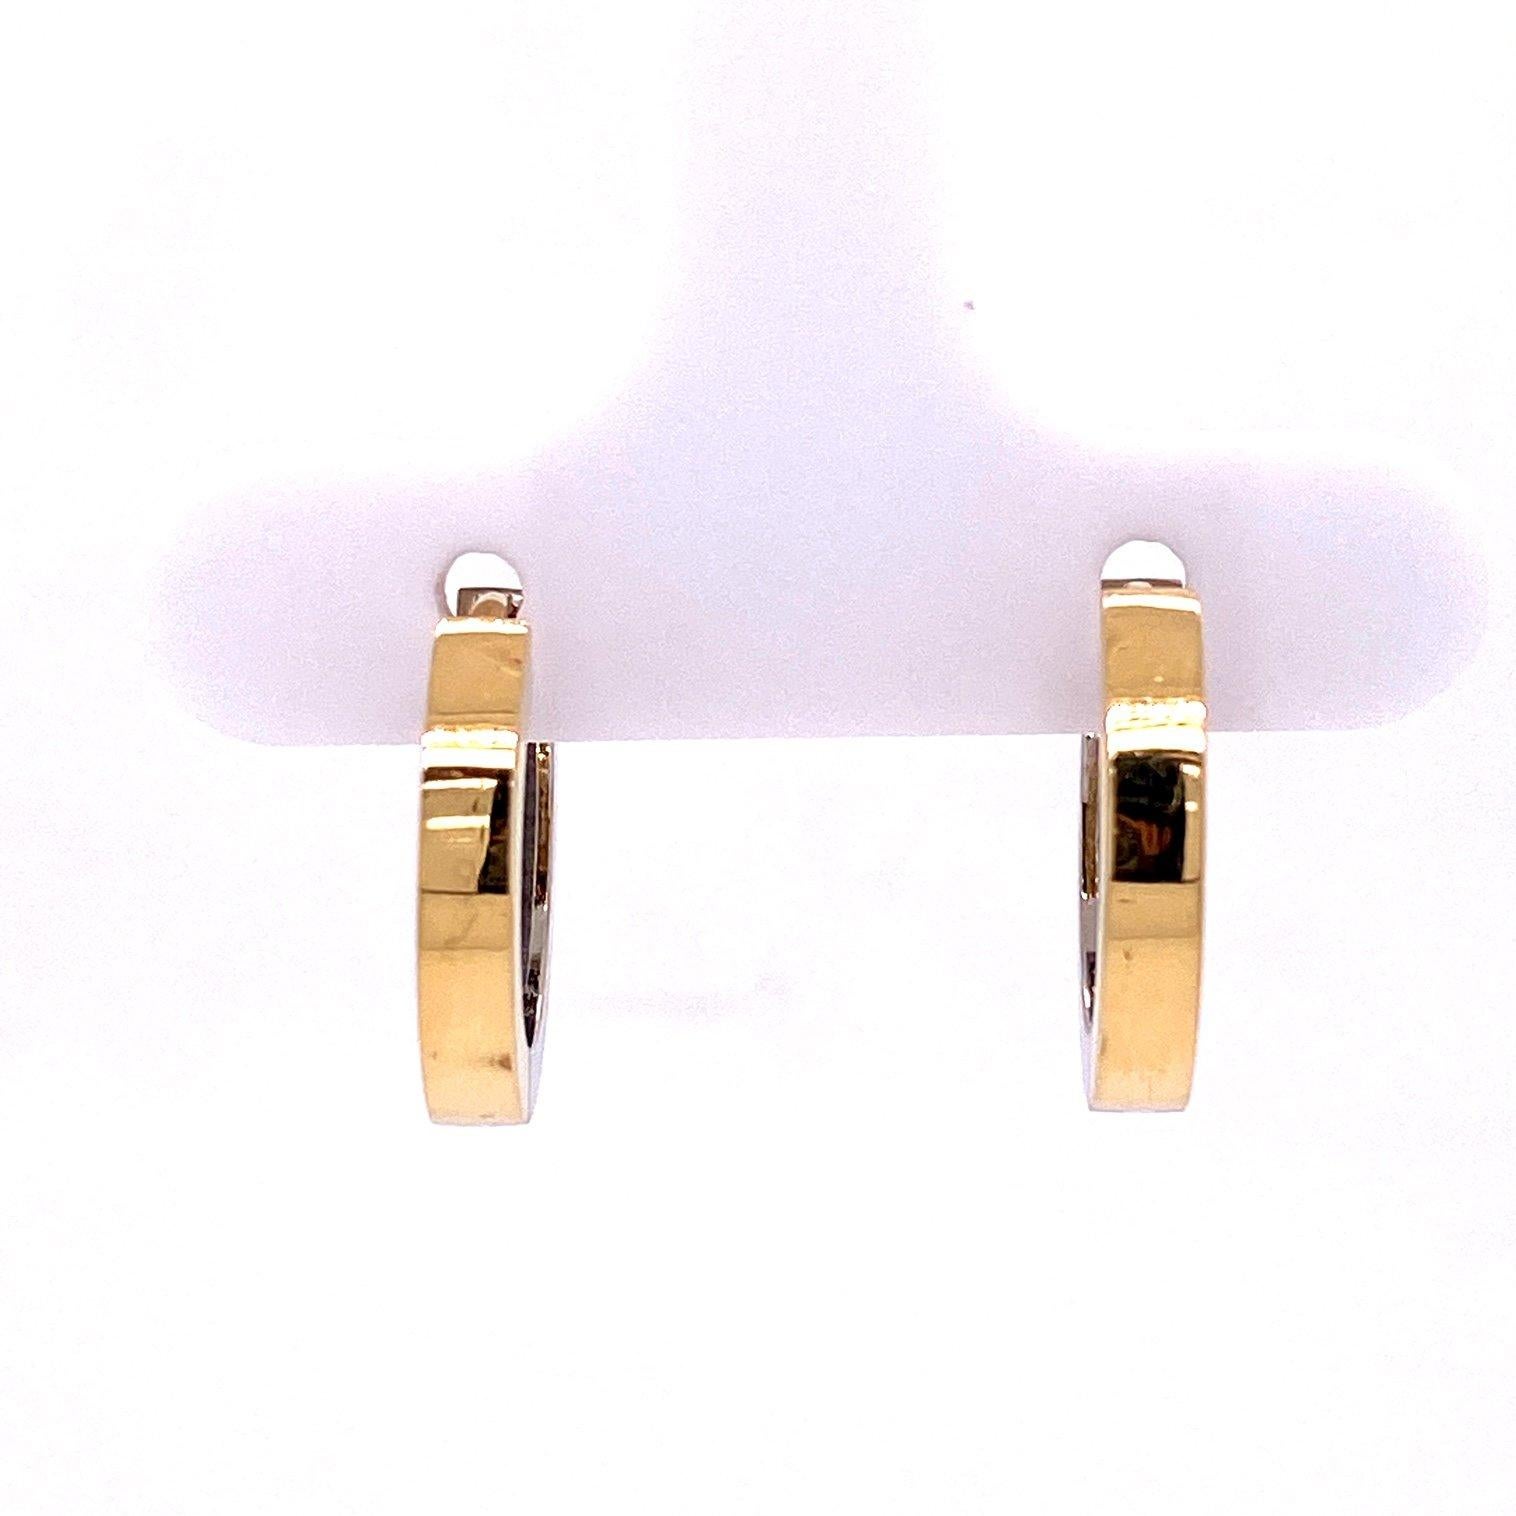 Bead 18k White and Yellow Gold Hoops with Sterling Silver Meteorite Jackets For Sale